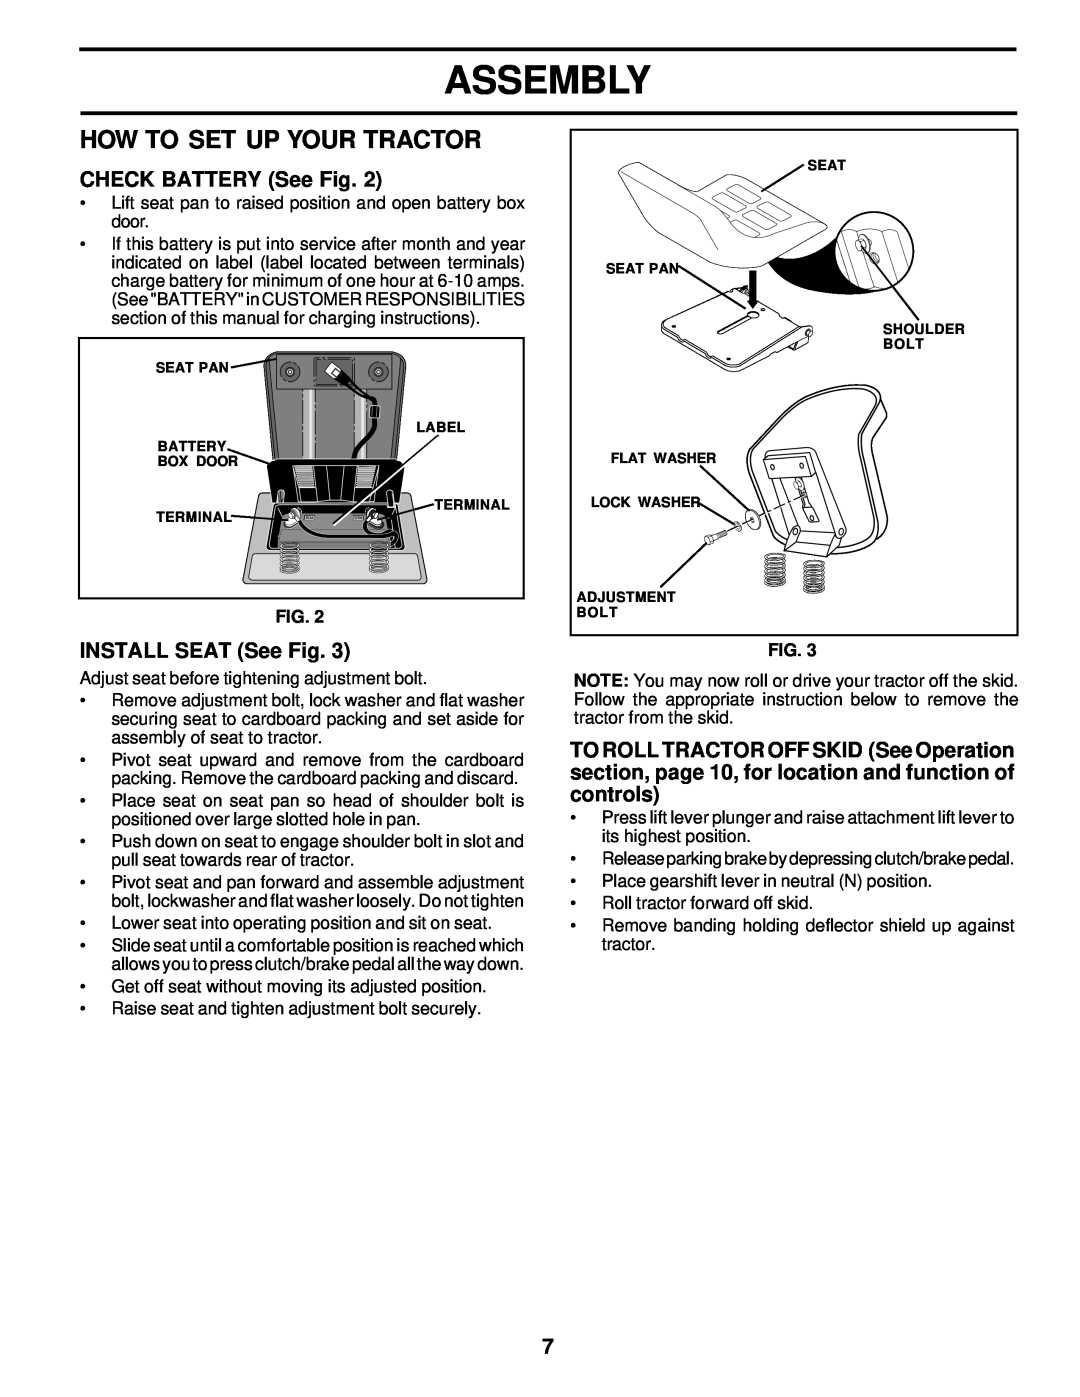 Poulan 176851 owner manual How To Set Up Your Tractor, CHECK BATTERY See Fig, INSTALL SEAT See Fig, Assembly 